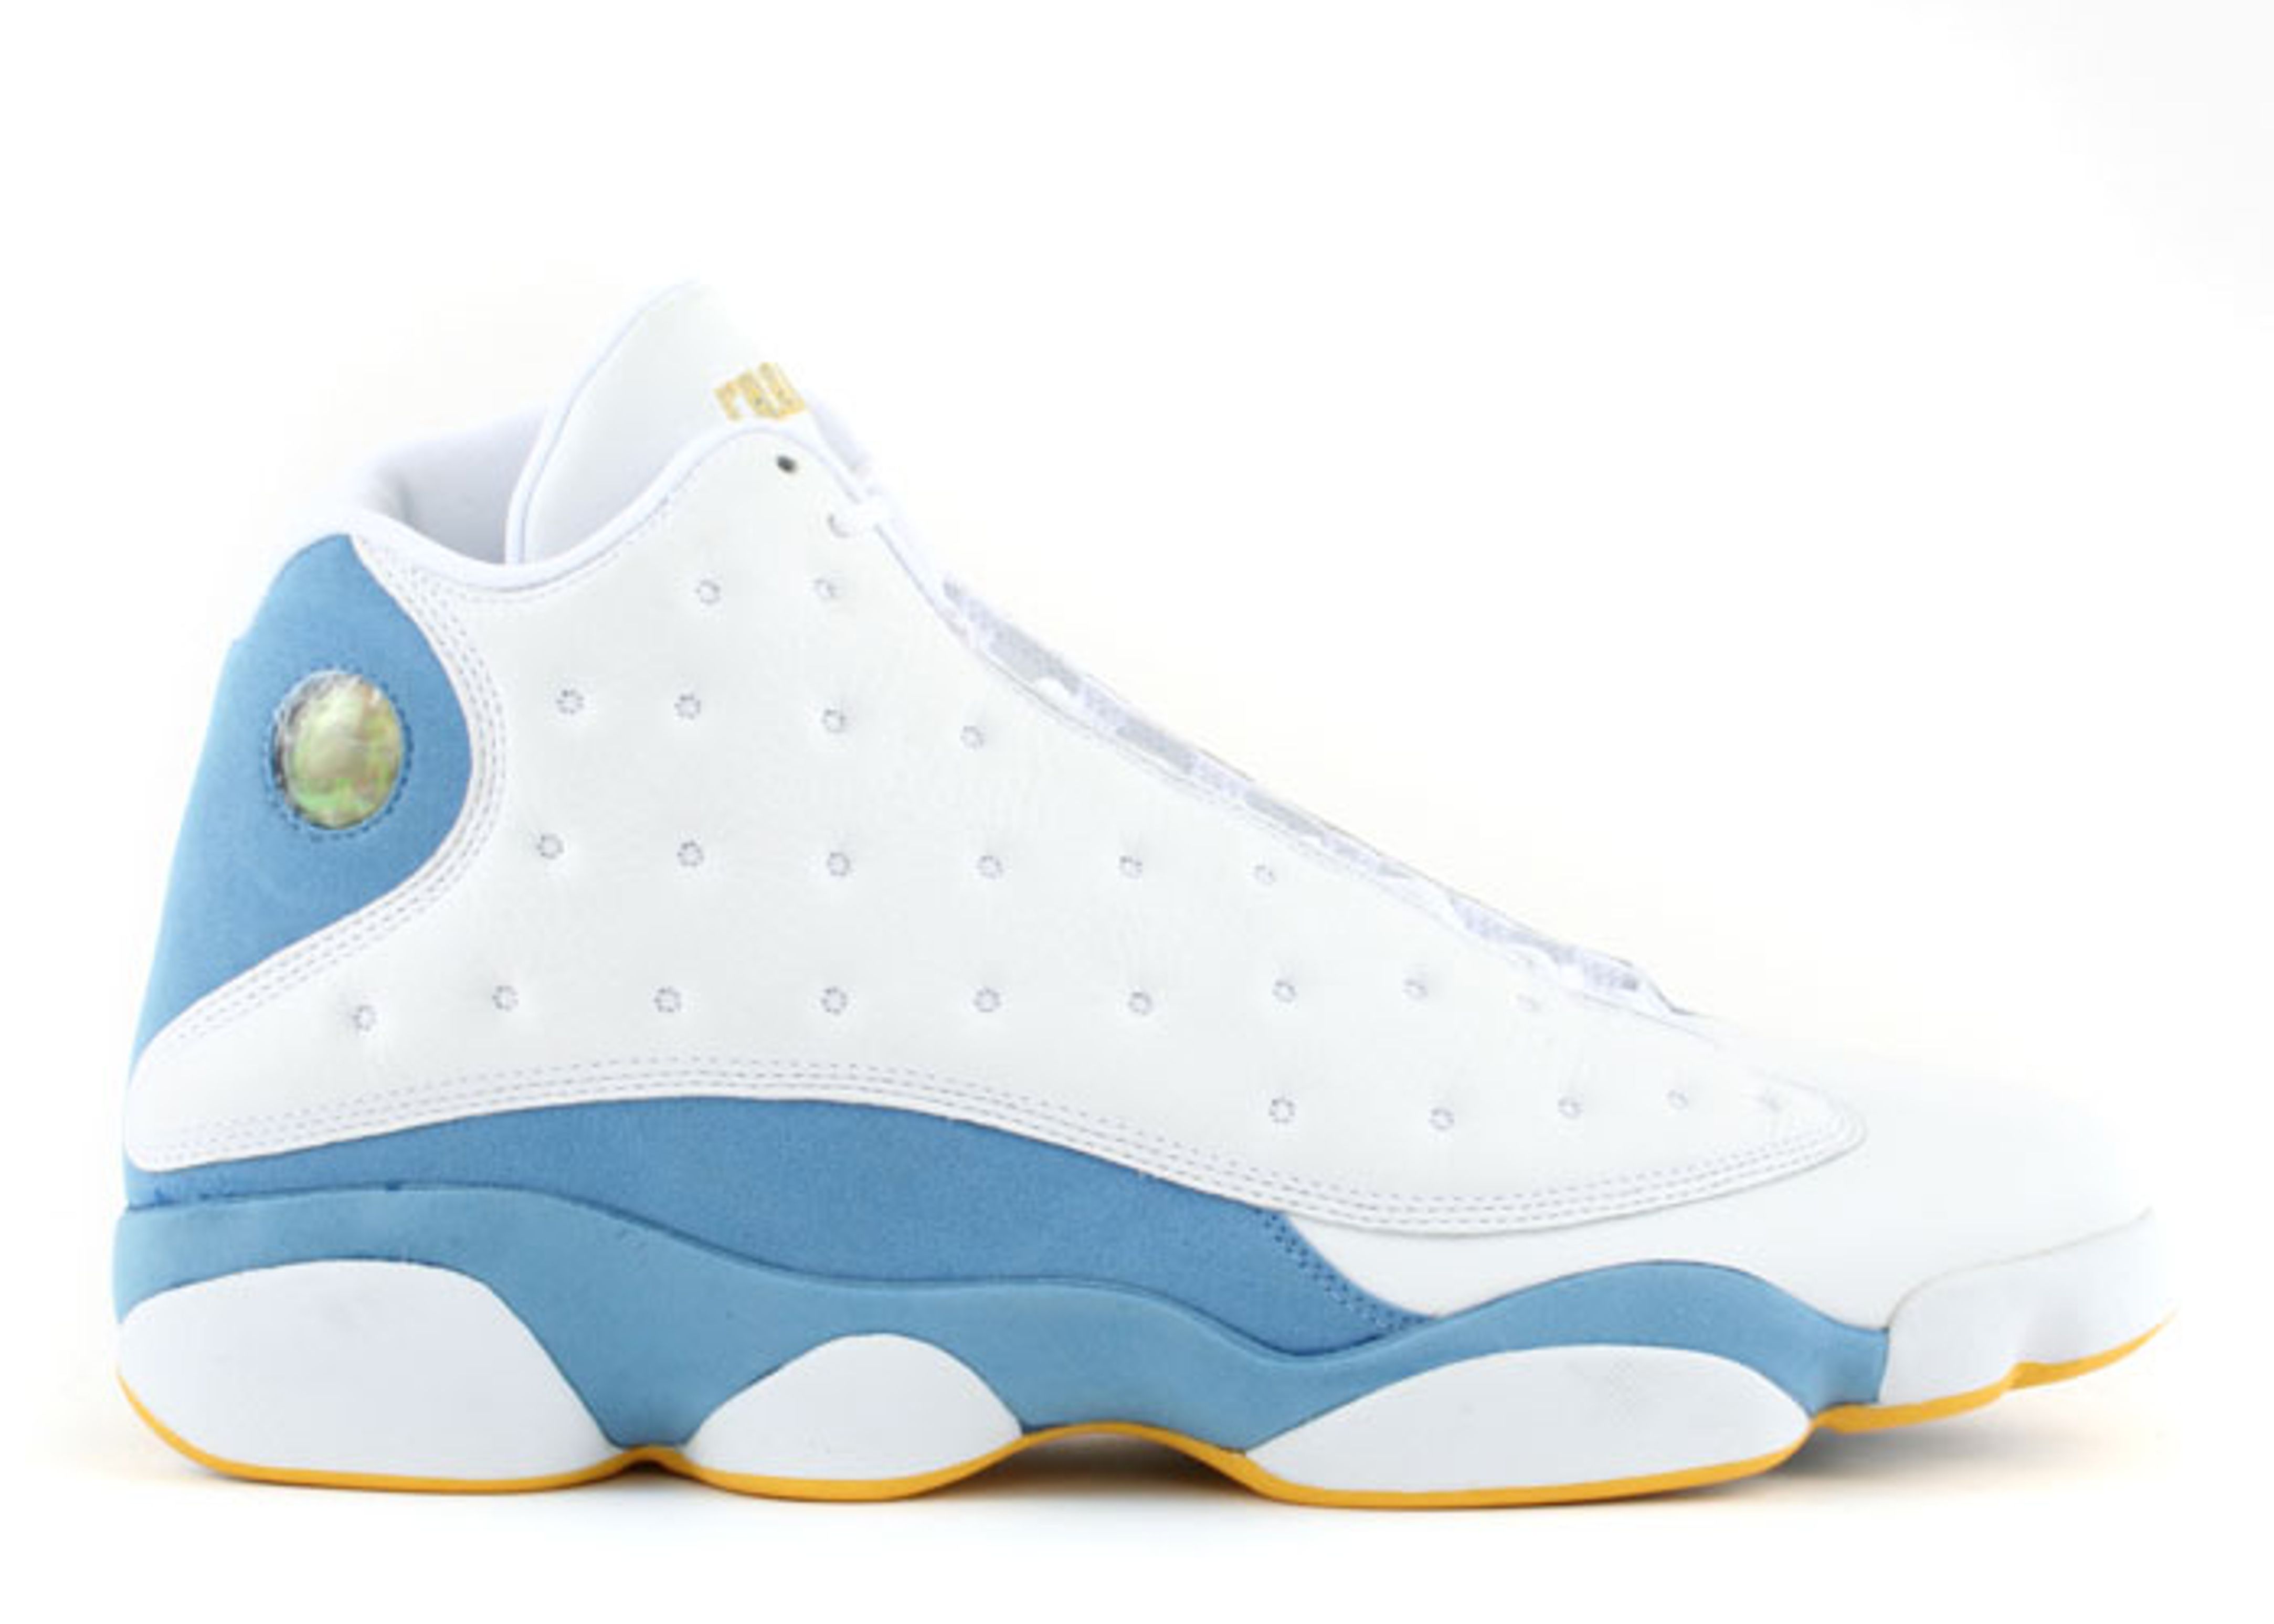 blue and yellow jordans 13